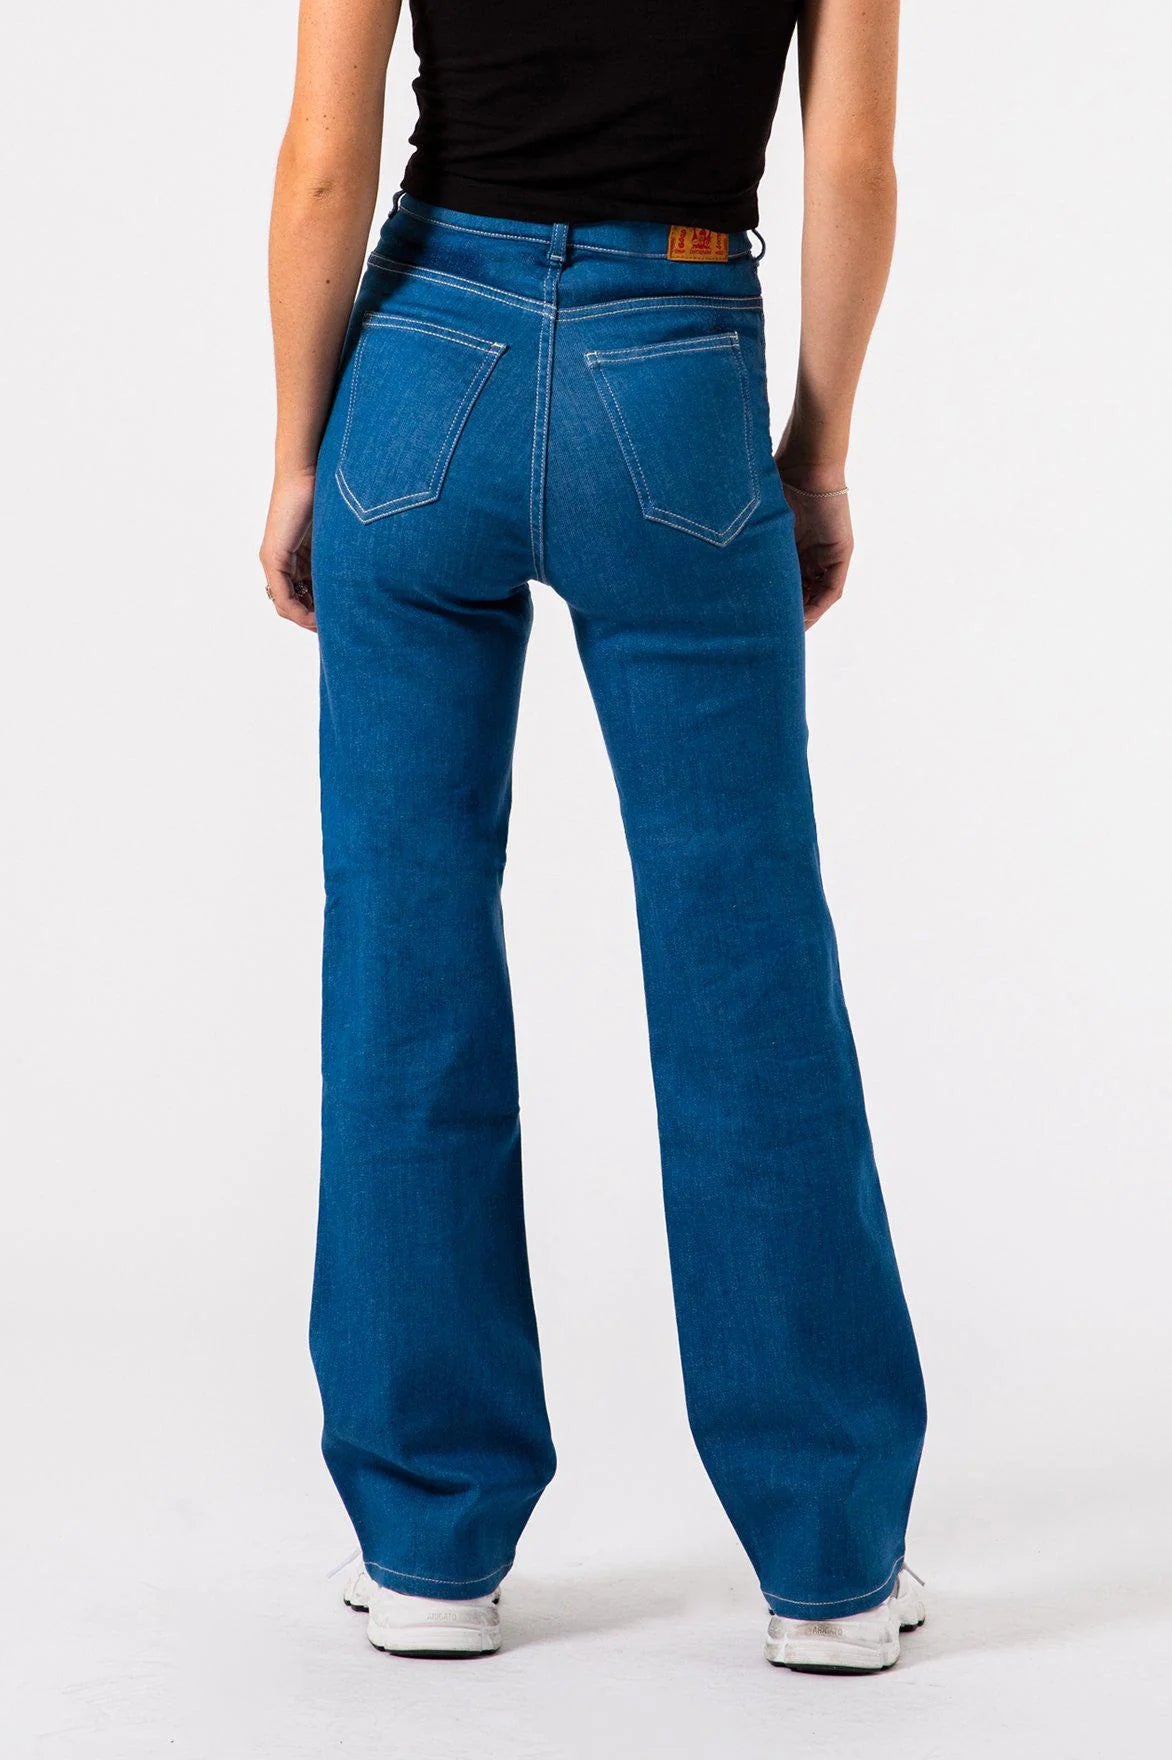 Load image into Gallery viewer, Dr. Denim Moxy Straight Jeans - Less Blue Rinse
